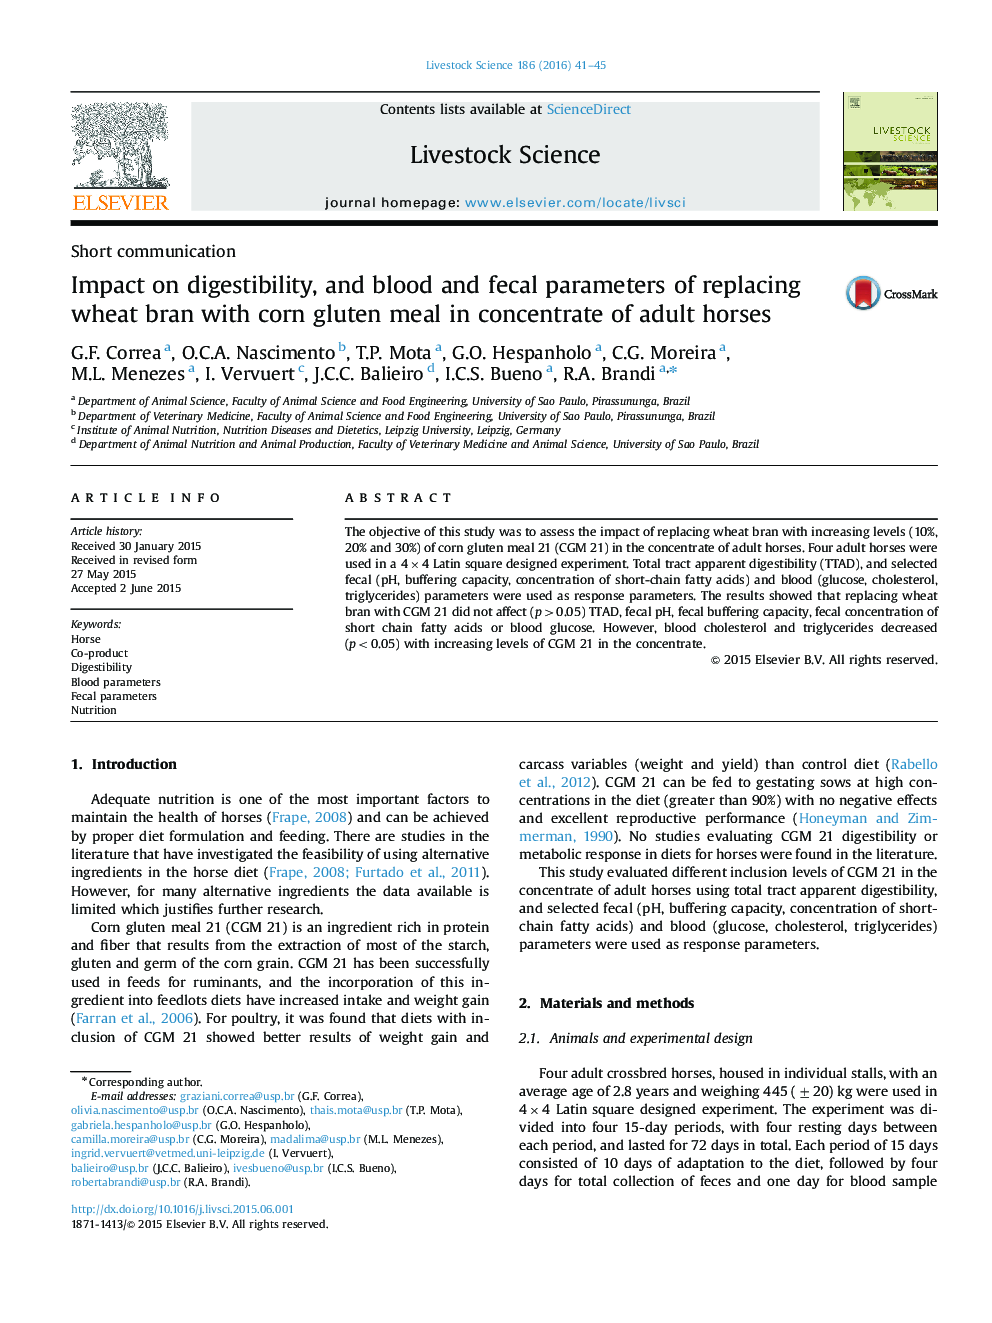 Impact on digestibility, and blood and fecal parameters of replacing wheat bran with corn gluten meal in concentrate of adult horses